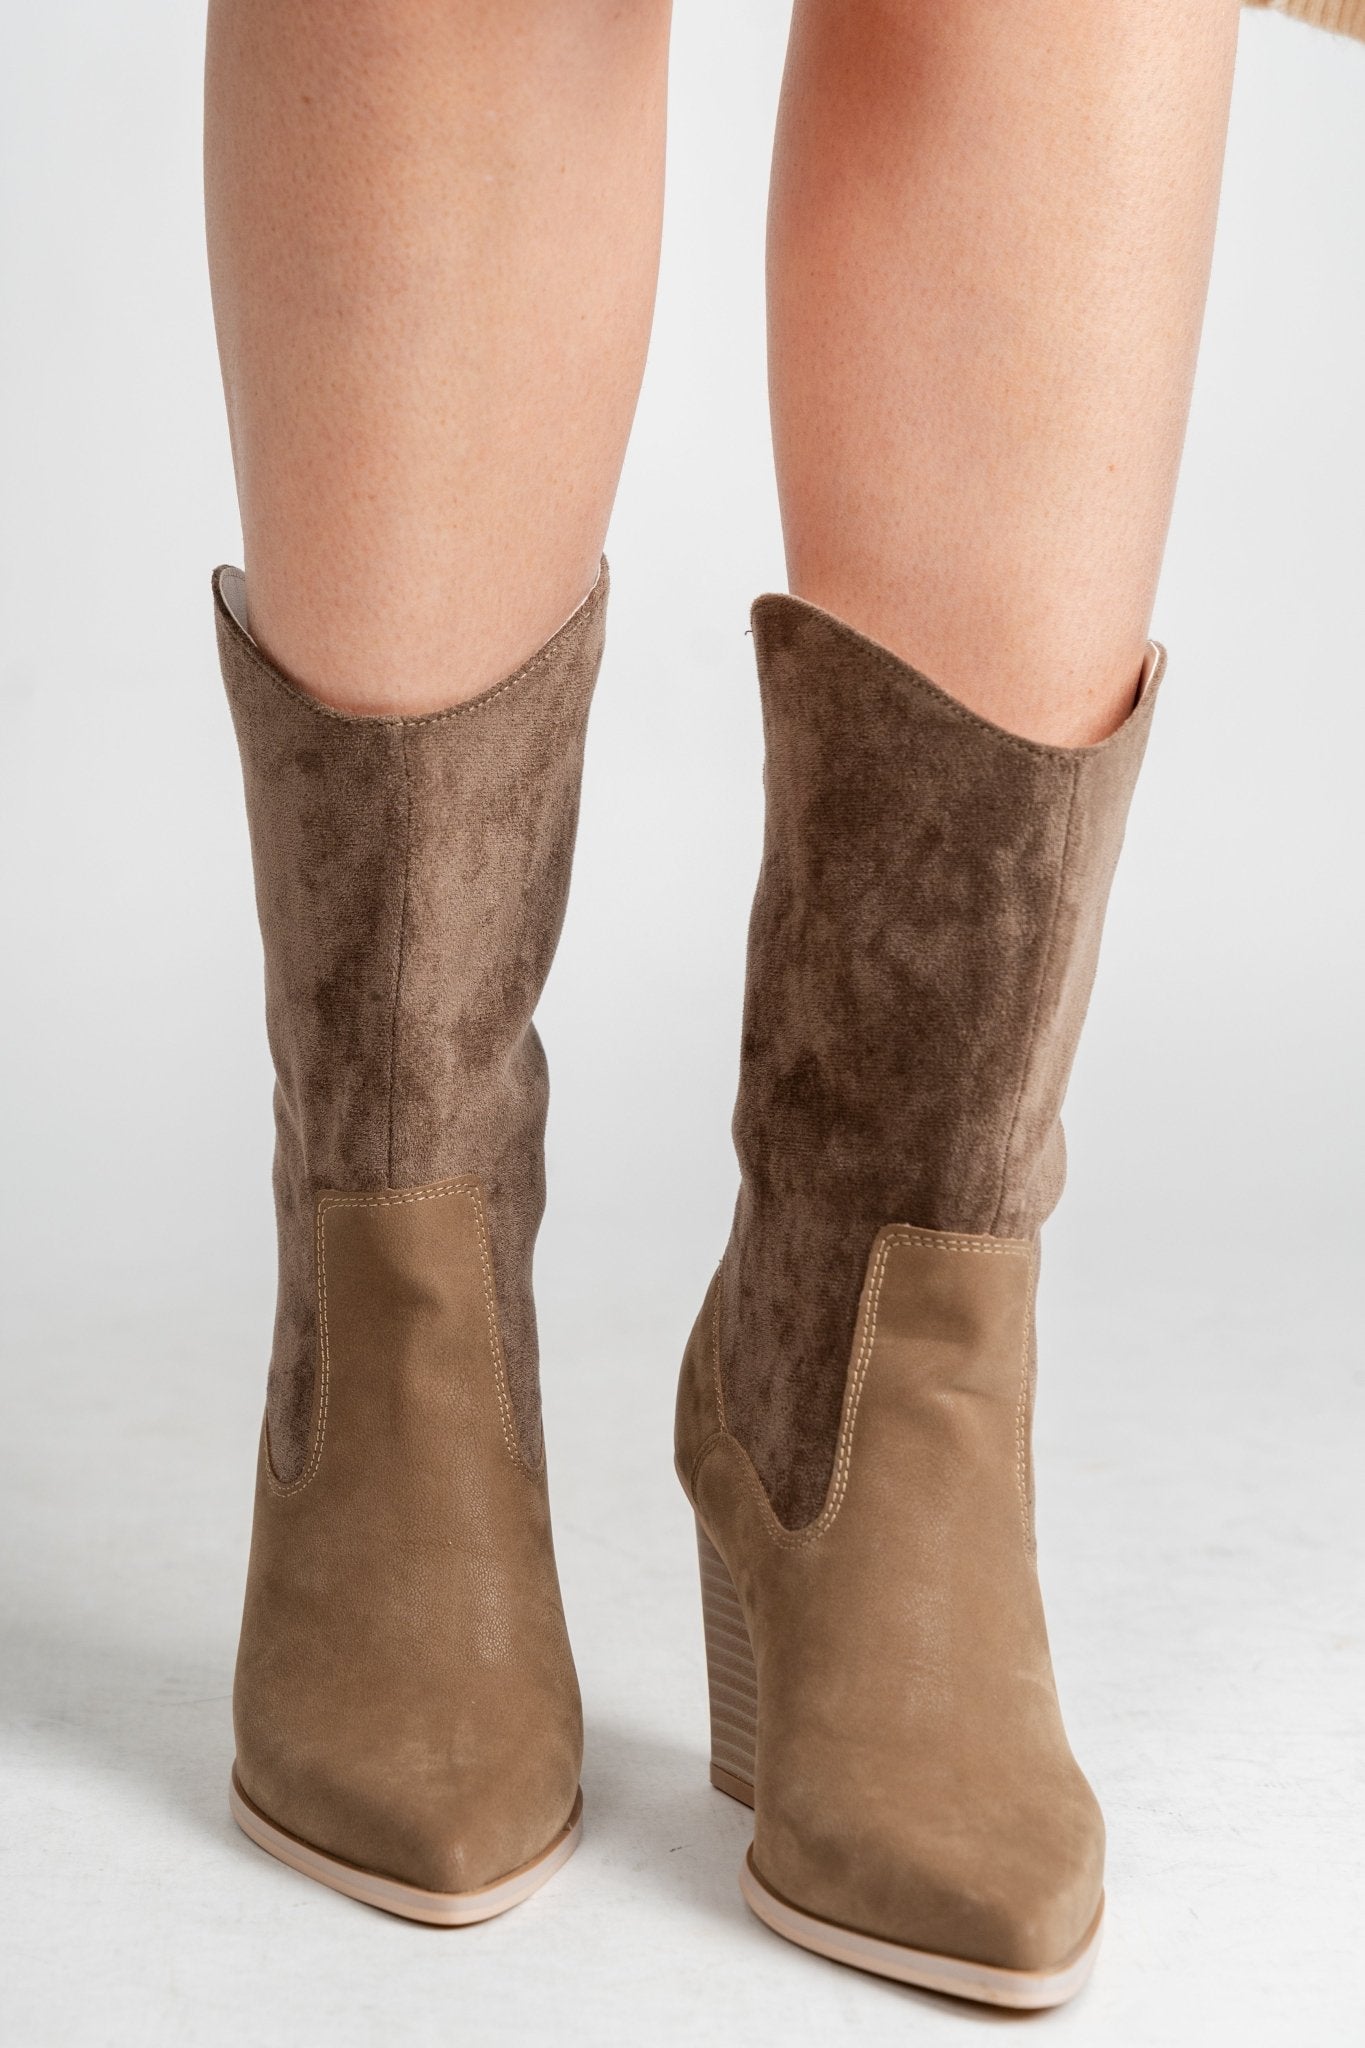 Marseille loose fit boot dark taupe - Affordable shoes - Boutique Shoes at Lush Fashion Lounge Boutique in Oklahoma City